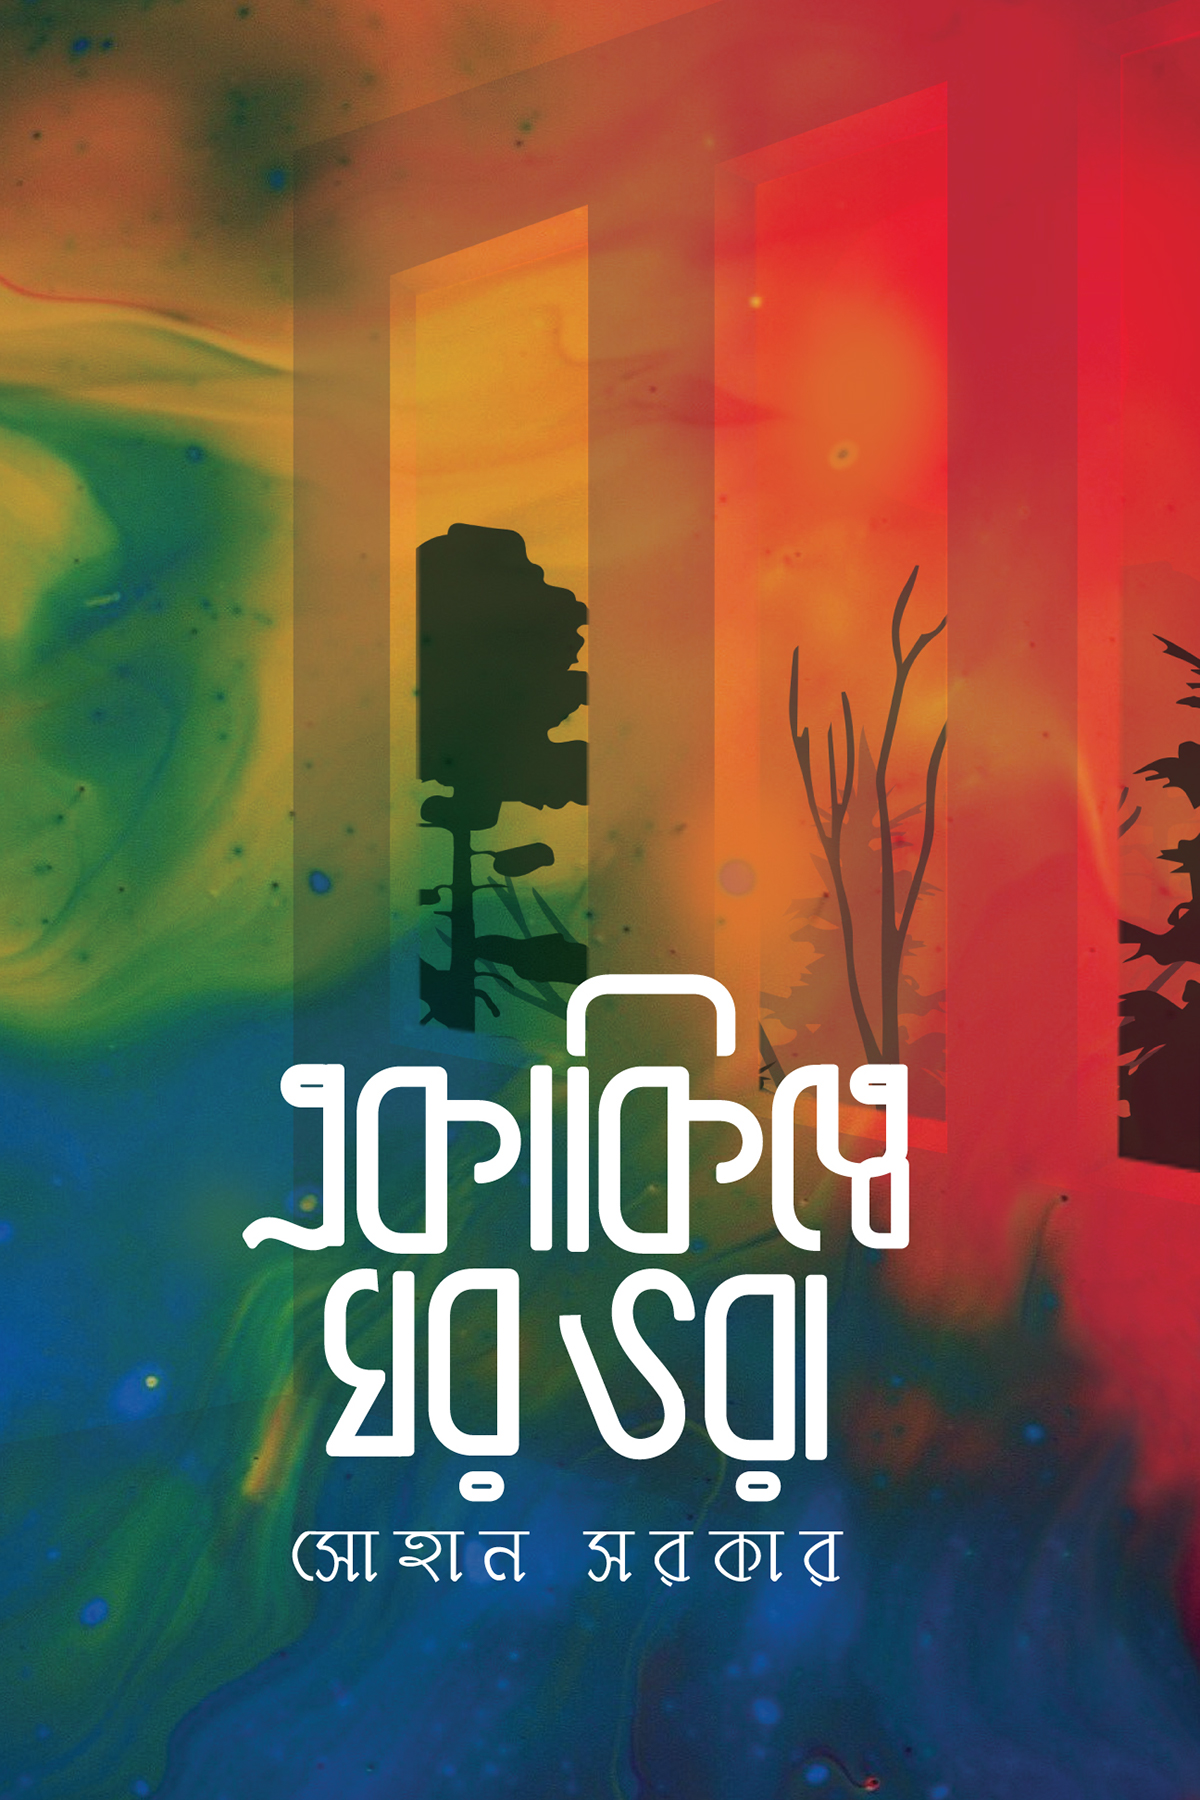 book cover bangla psychedelic color Bangla Typography modern book colorful book cover graphic design  color